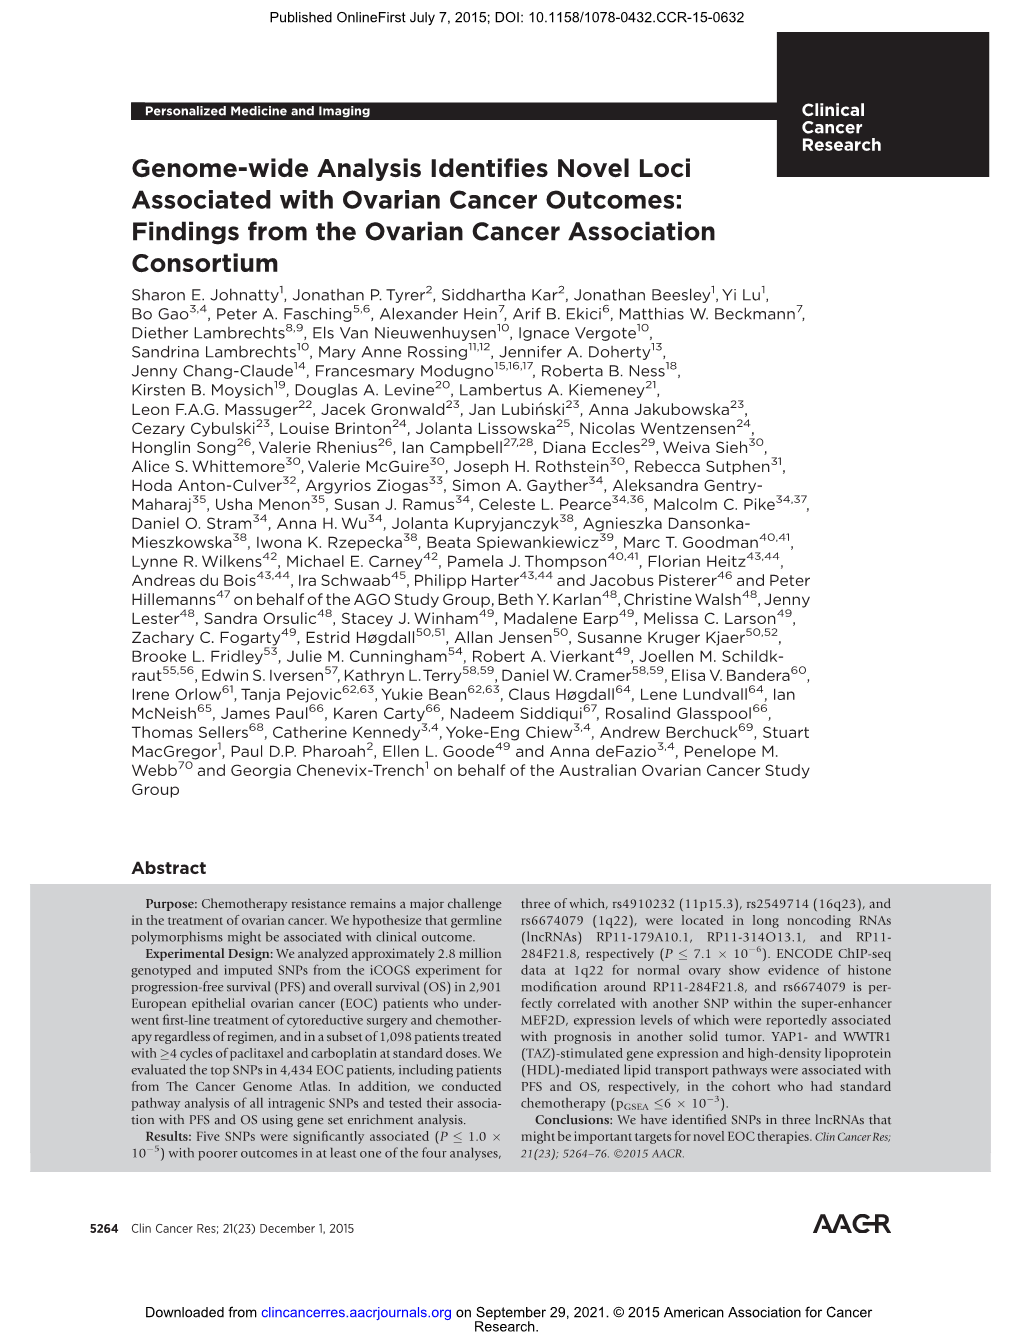 Genome-Wide Analysis Identifies Novel Loci Associated with Ovarian Cancer Outcomes: Findings from the Ovarian Cancer Association Consortium